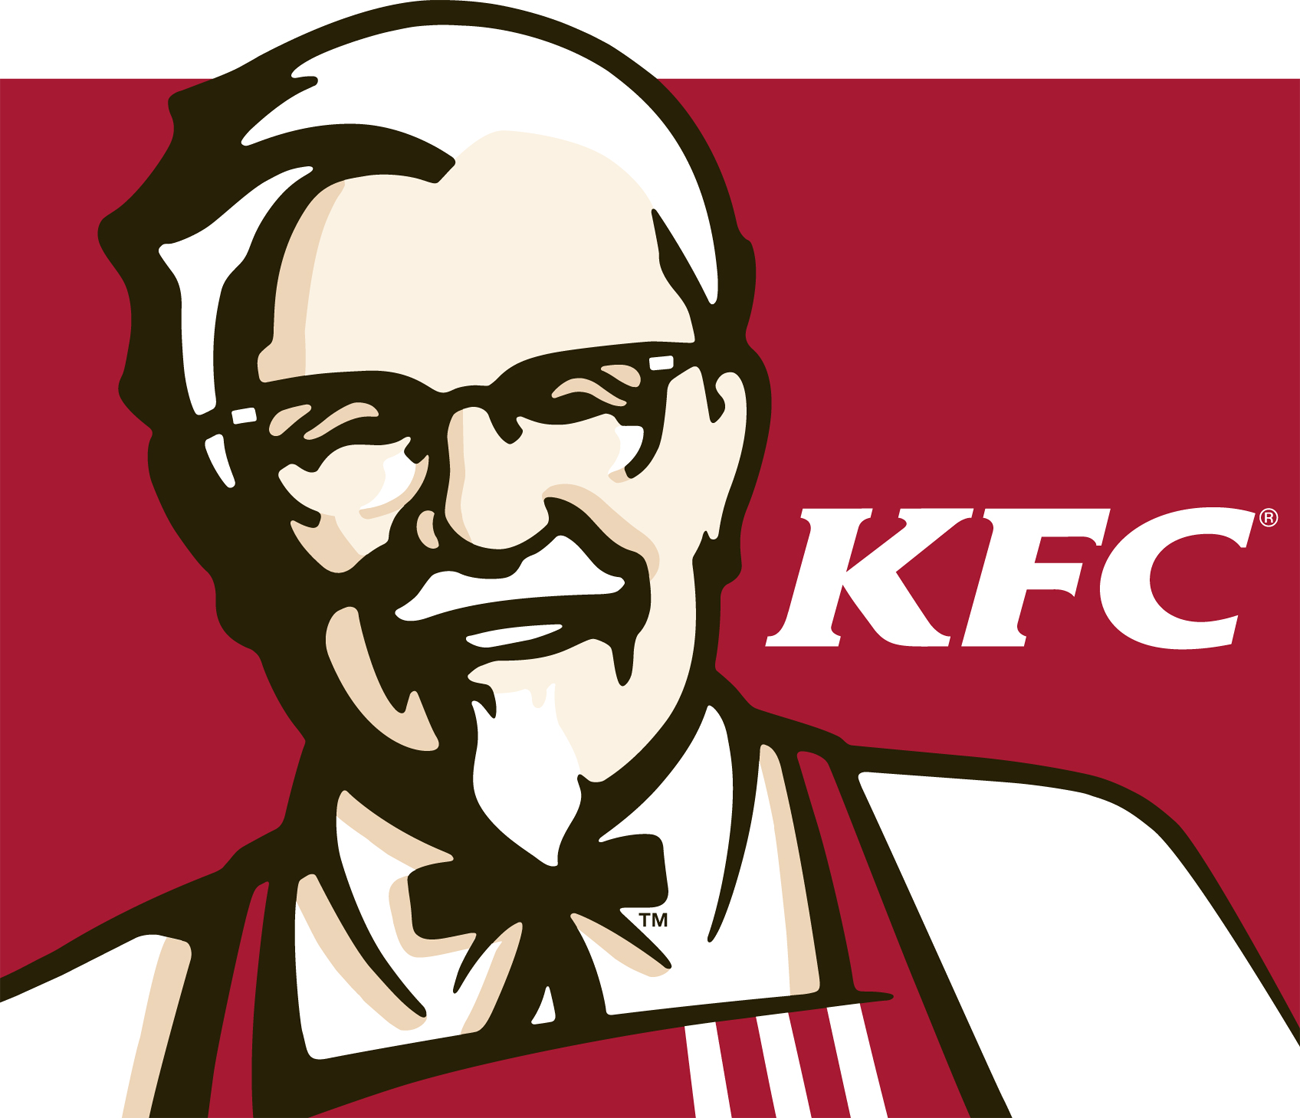 Kfc Logo And Symbol, Meaning, History, Png - Kfc, Transparent background PNG HD thumbnail